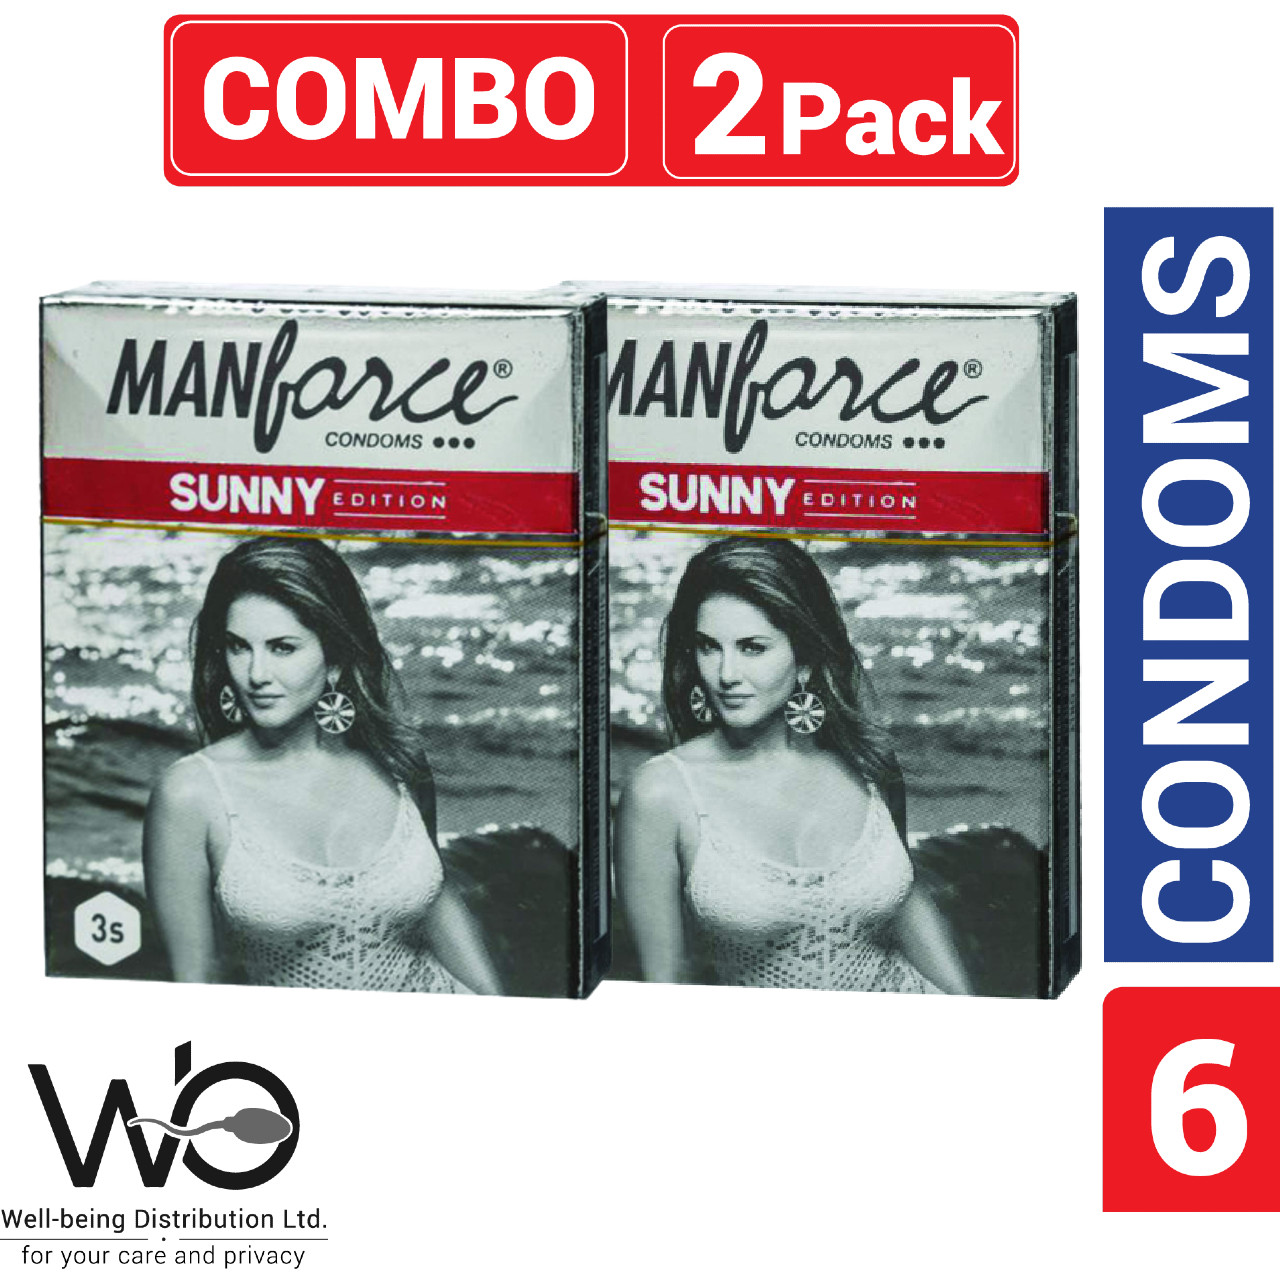 Manforce - Ribbed & Dotted Sunny Edition Condoms - Combo Pack - 2 Pack - 3x2=6pcs